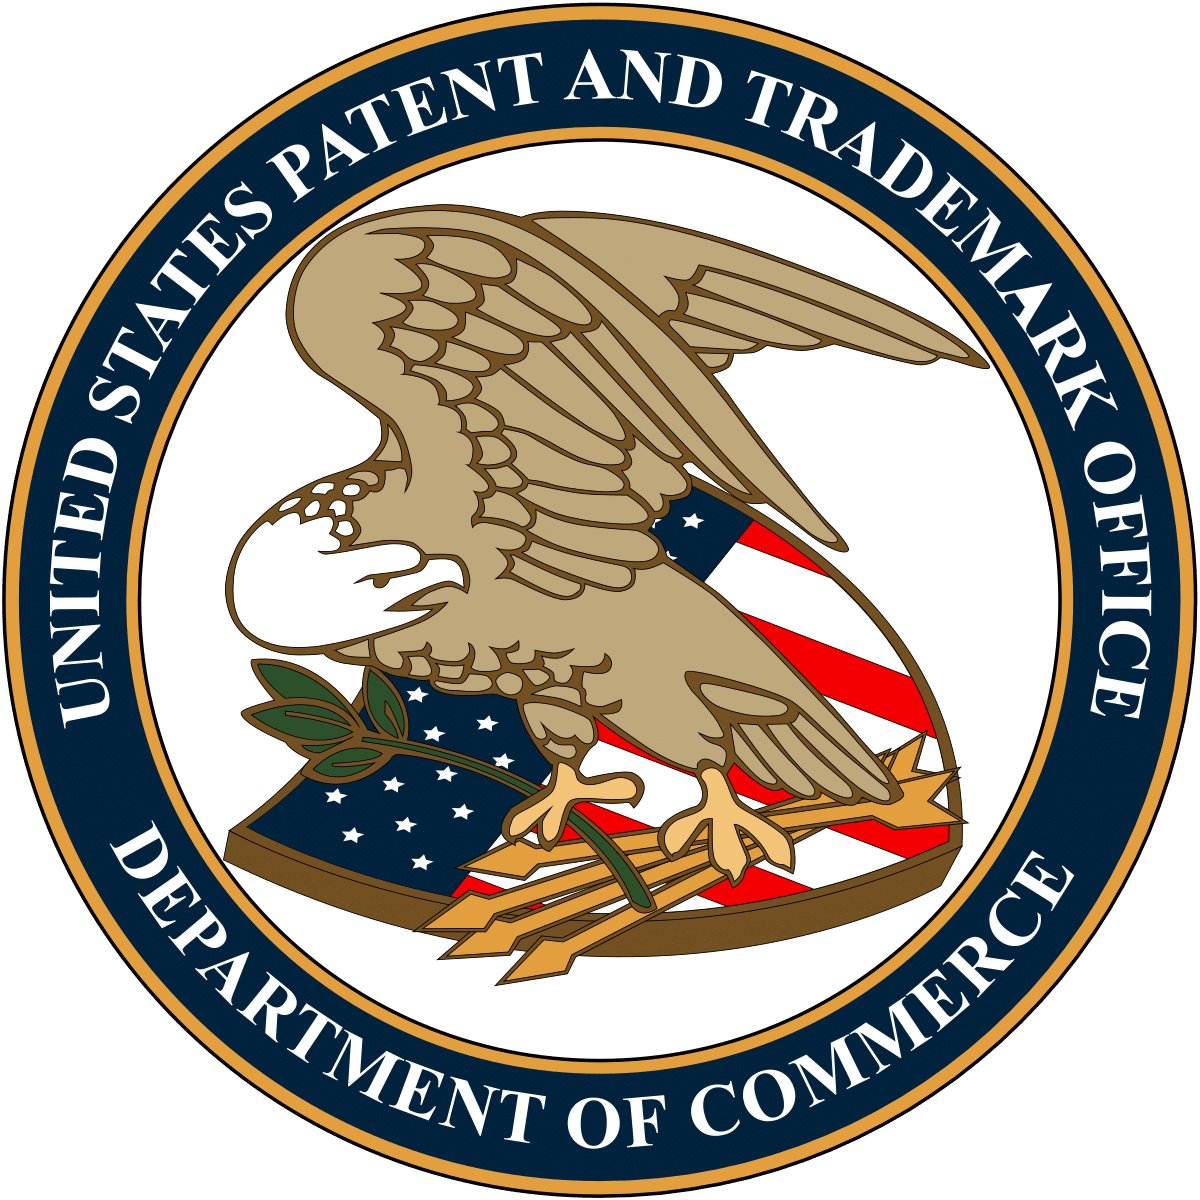 Image of the official seal of the United States Patent and Trademark Office.